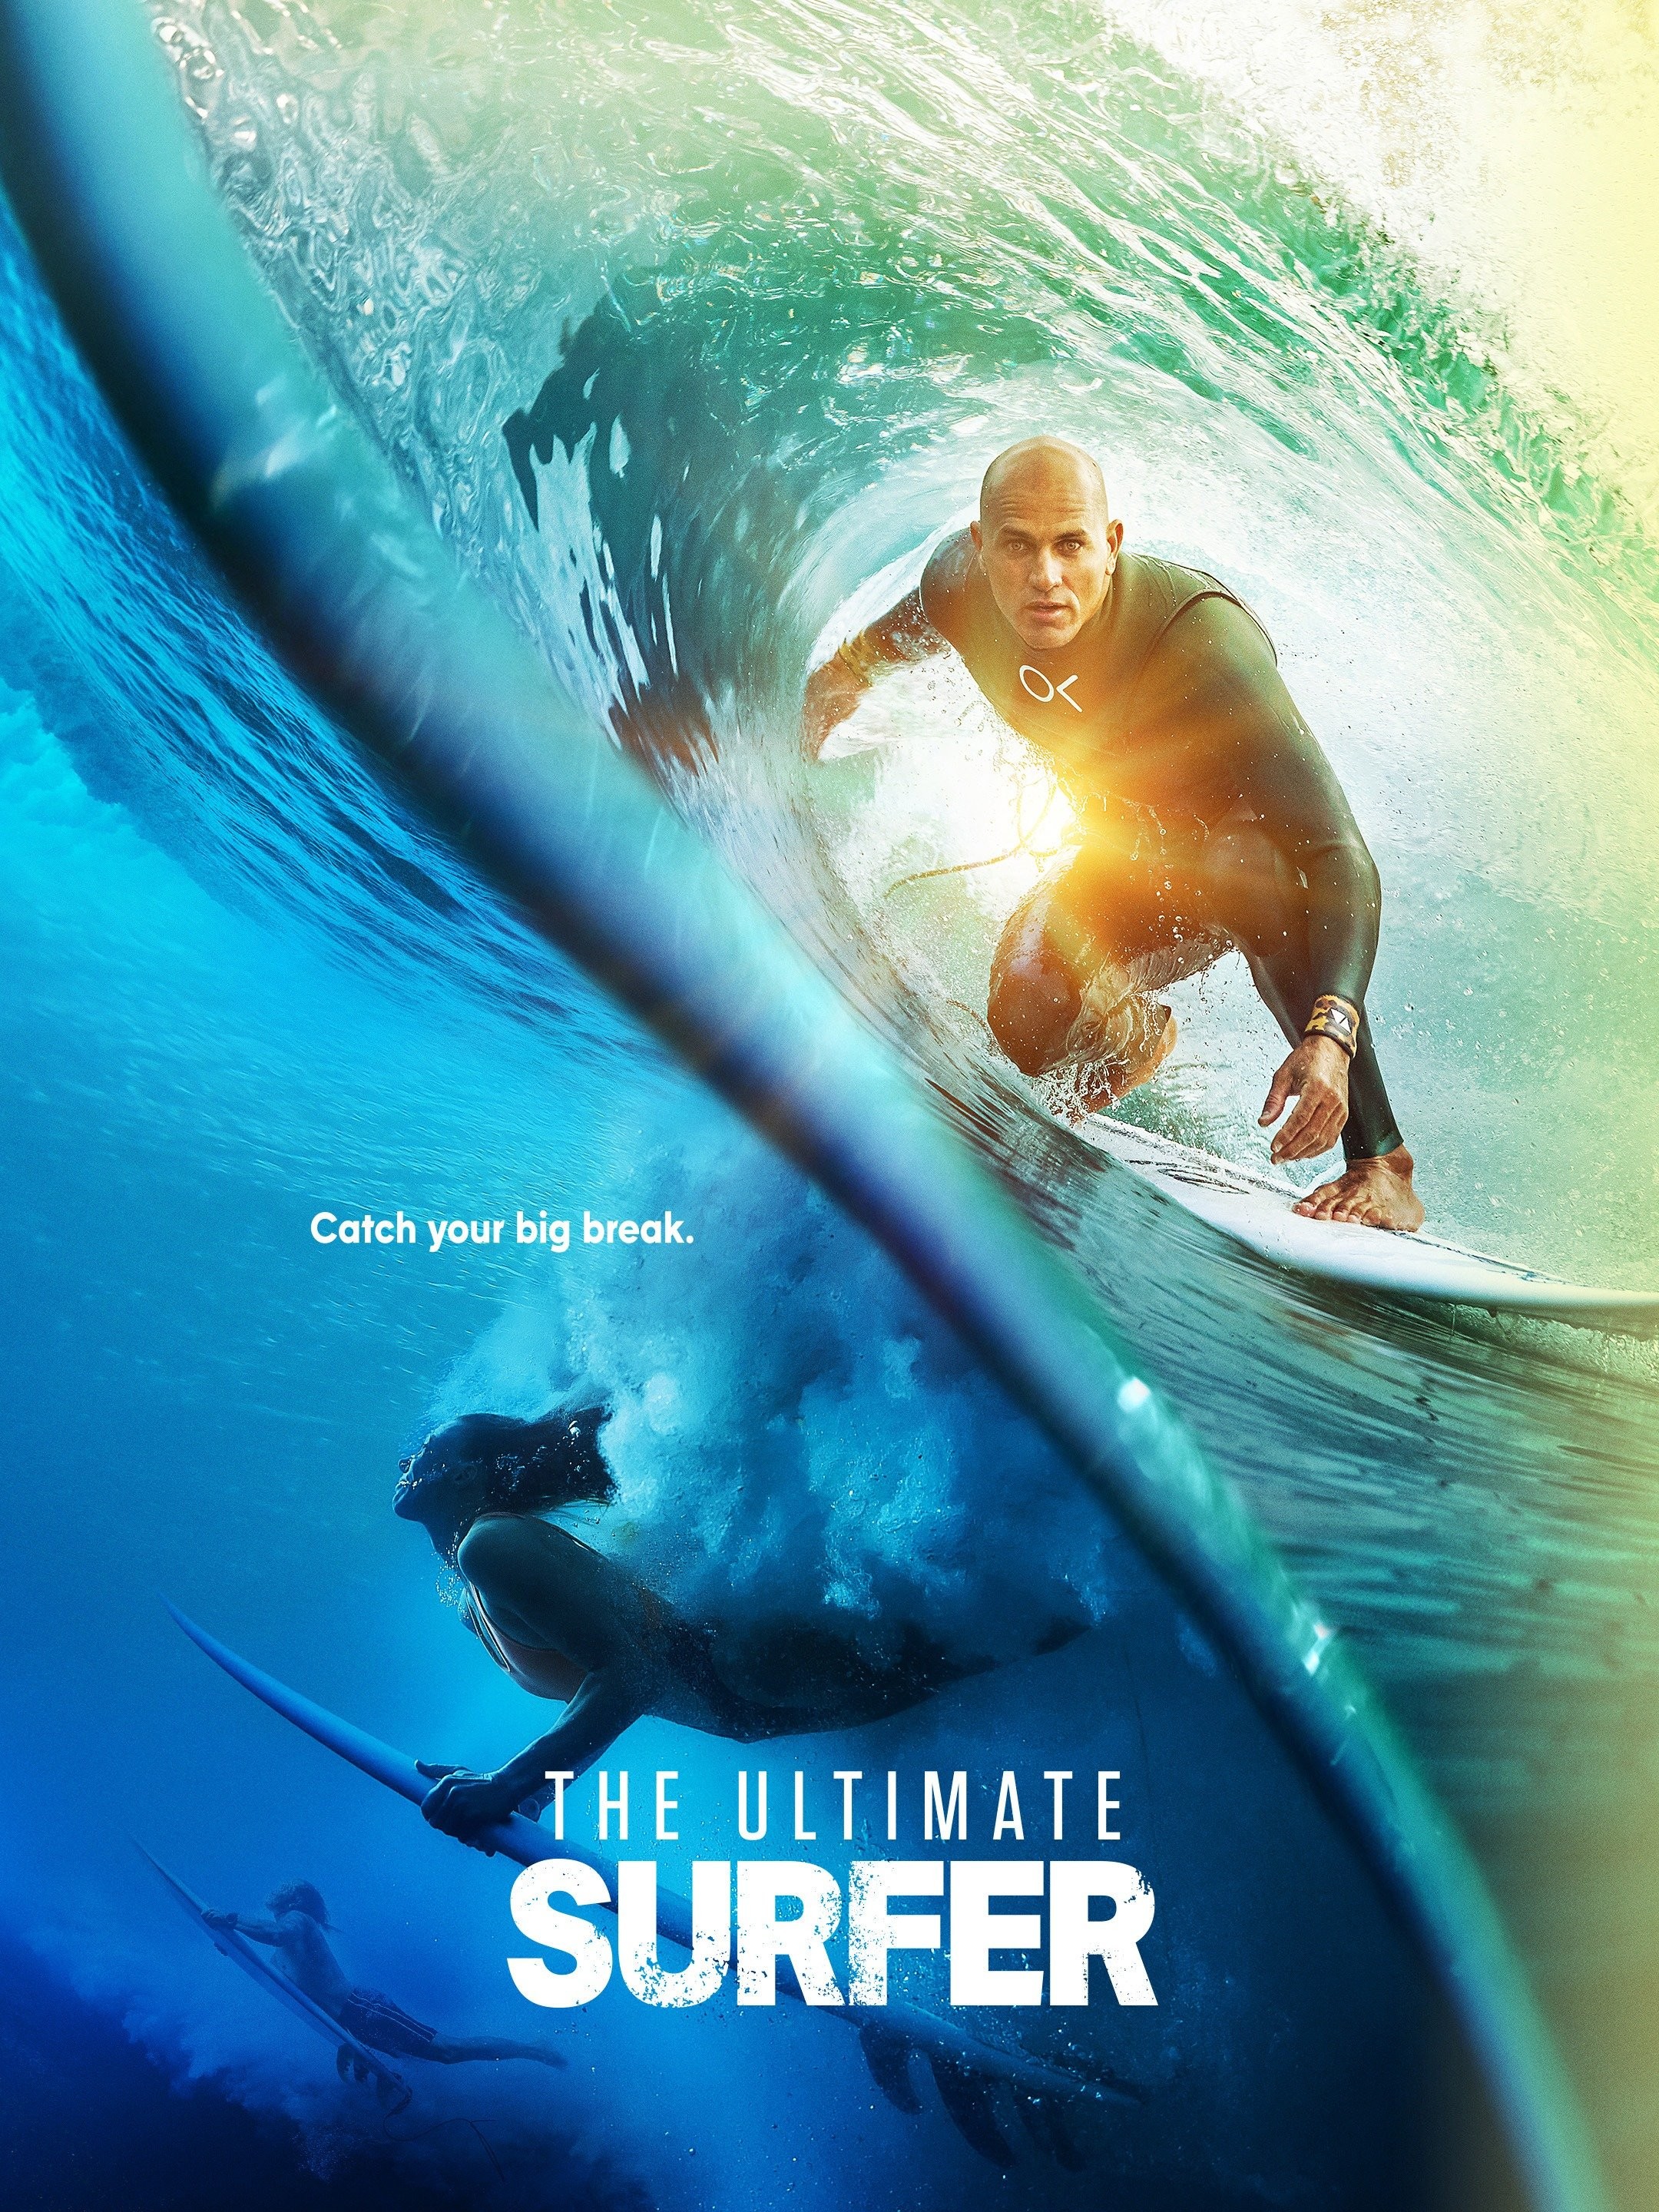 The Ultimate Surfer Season 1 | Rotten Tomatoes